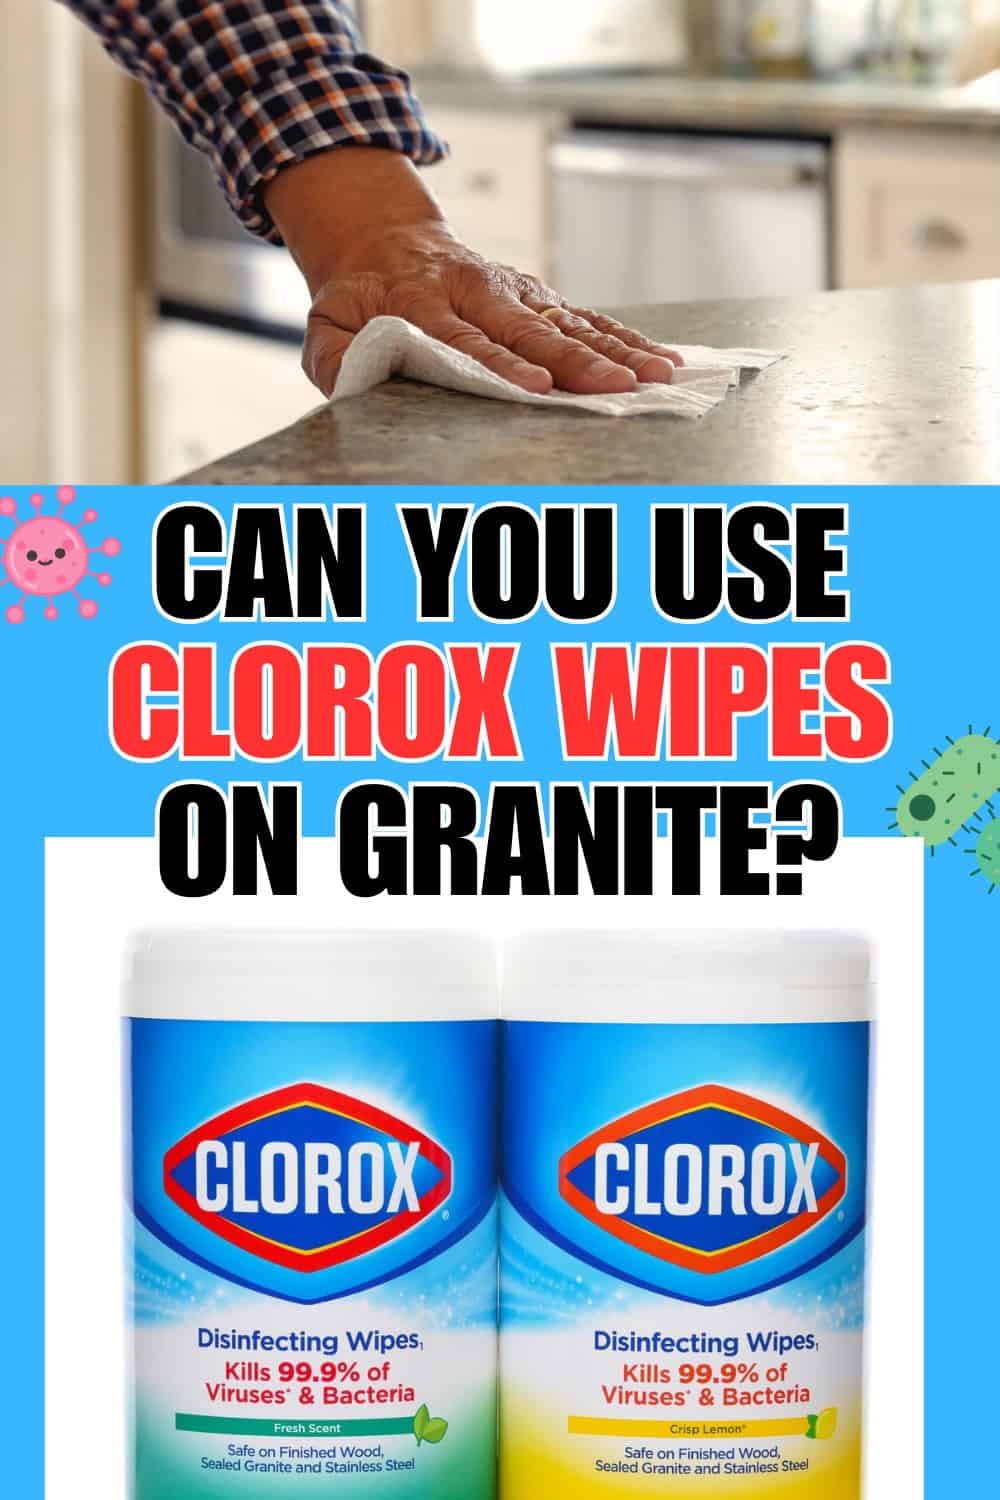 No You should not use Clorox wipes on granite